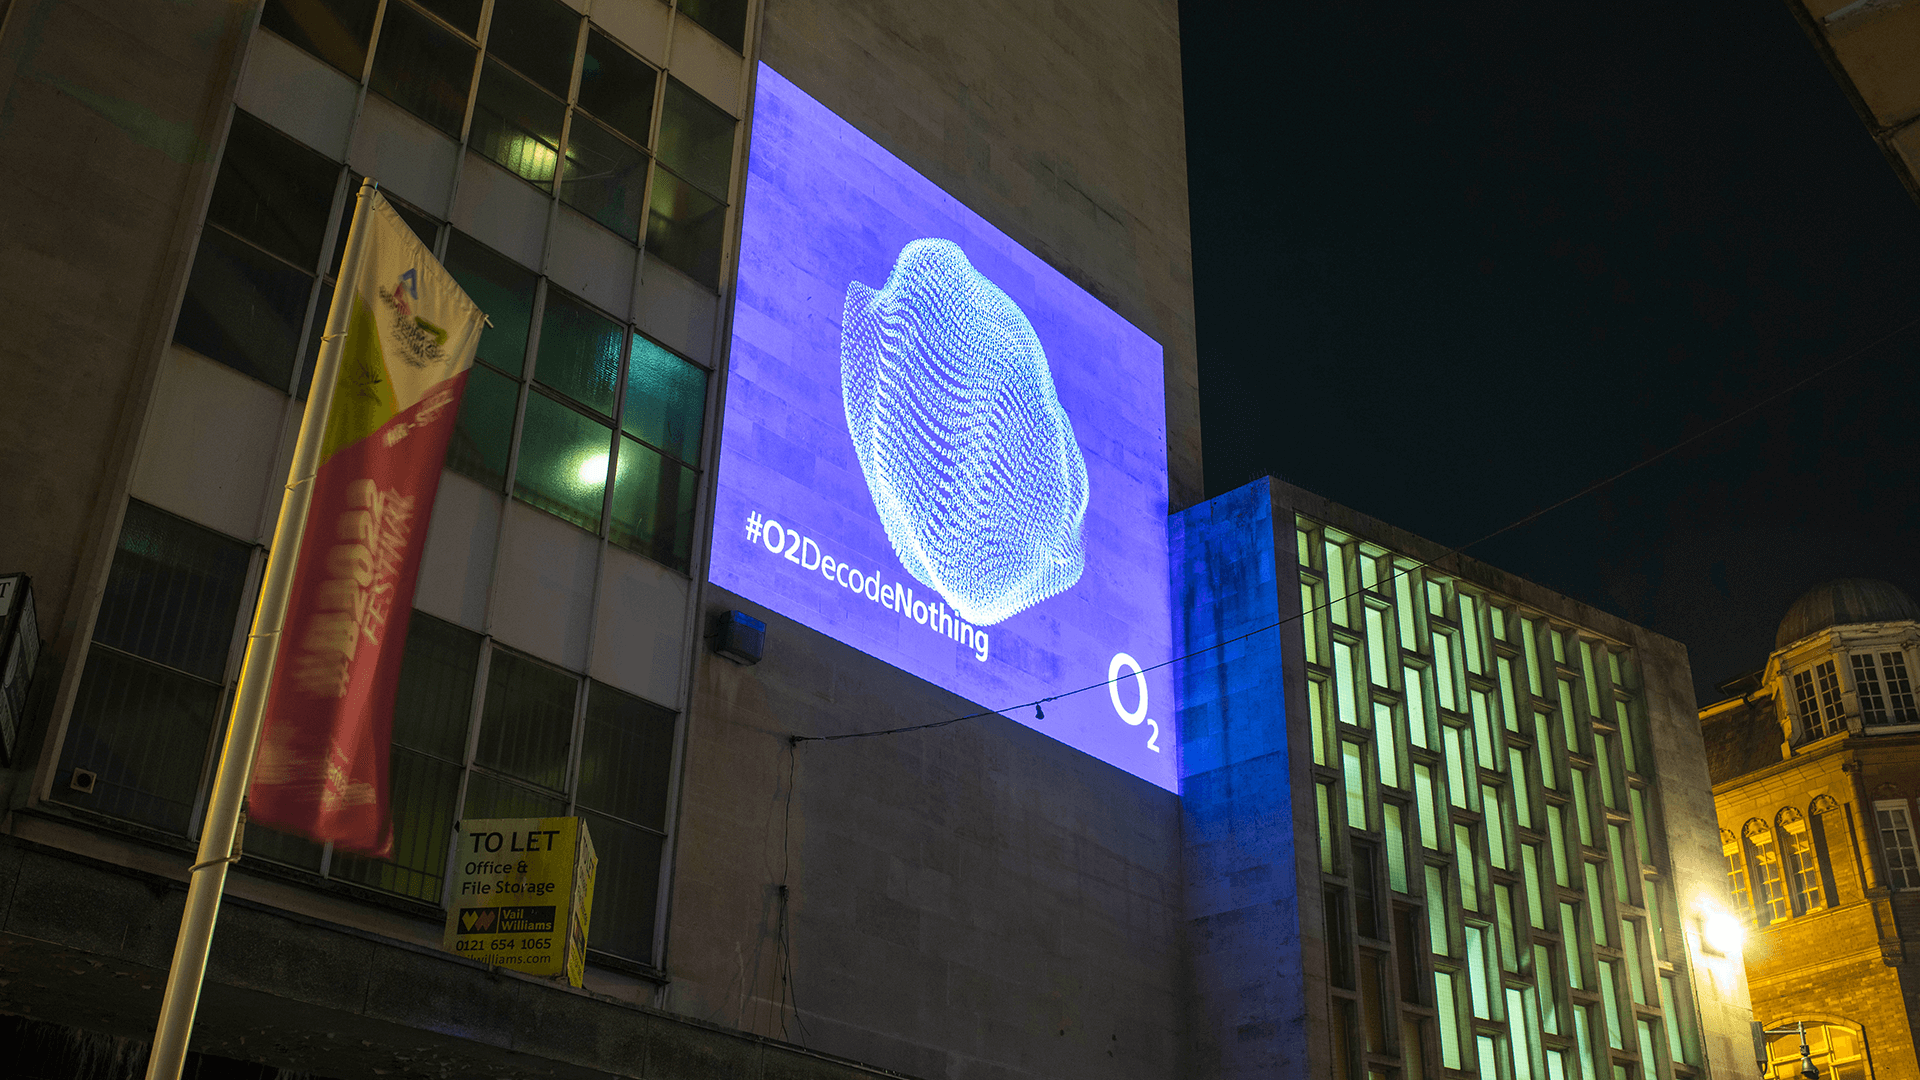 A light billboard with #O2DecodeNothing on it